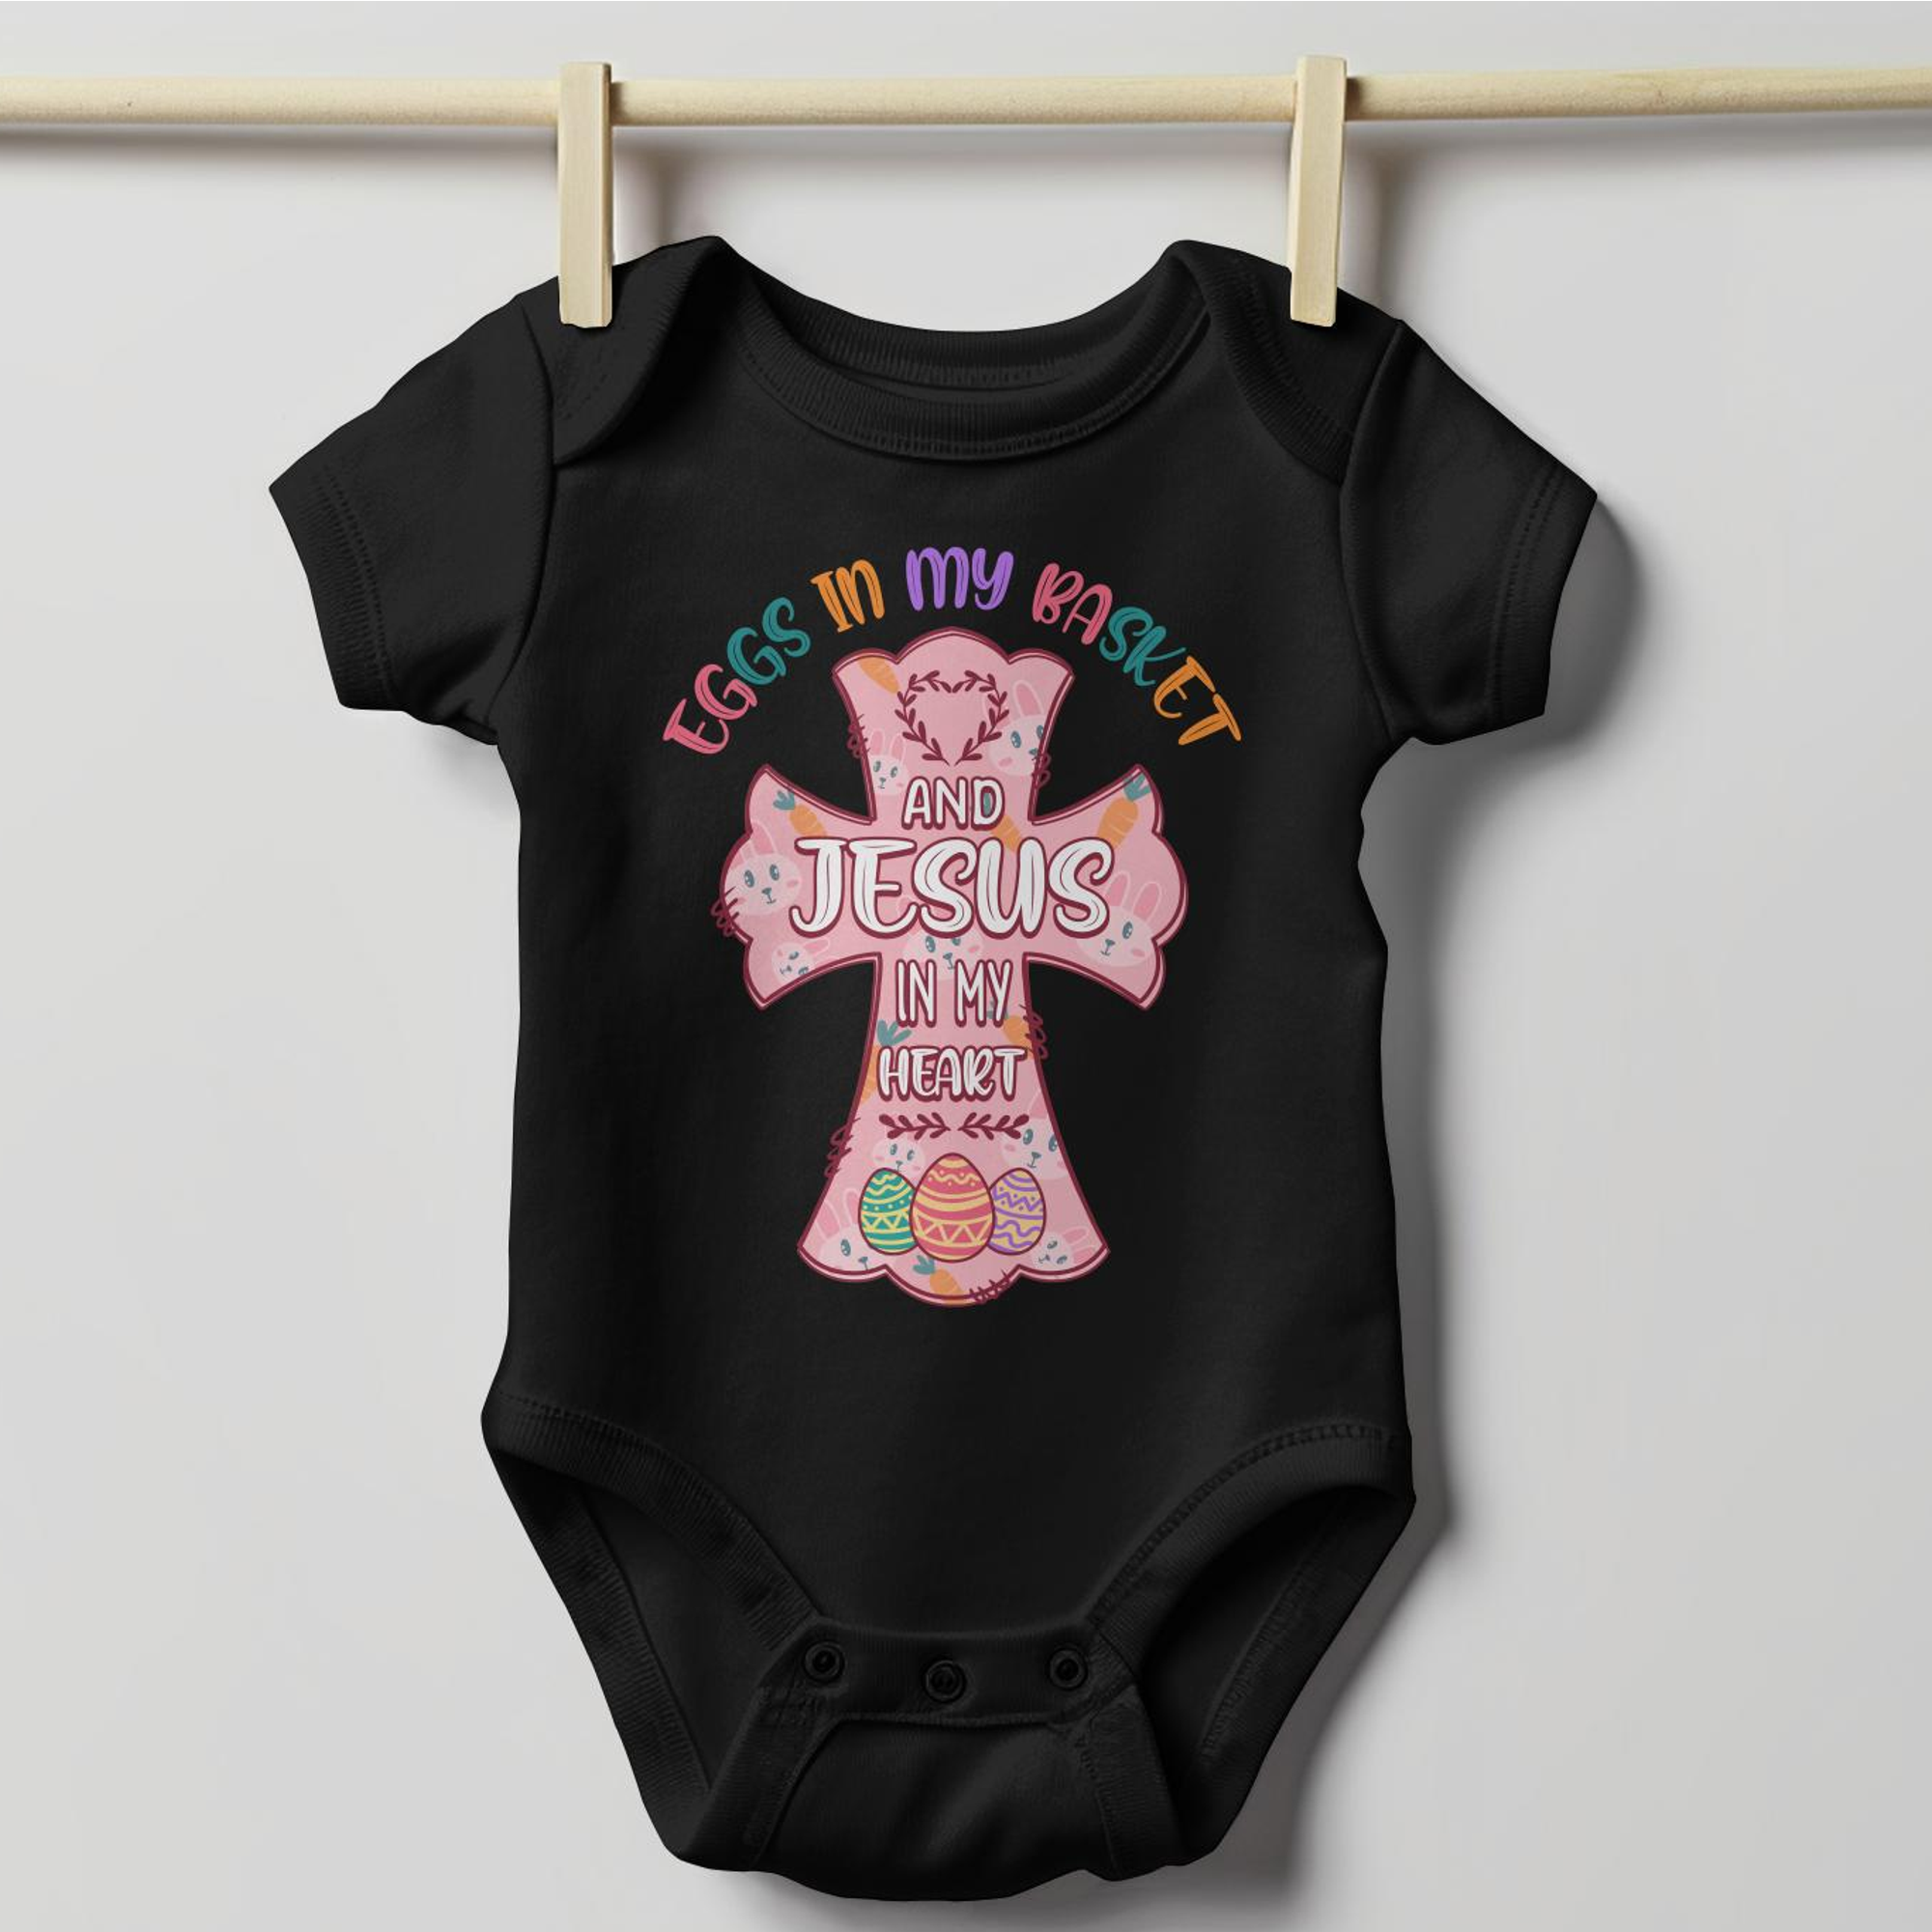 Eggs in My Basket Jesus in My Heart Infant Fine Jersey Bodysuit Size: 6mo Color: White Jesus Passion Apparel